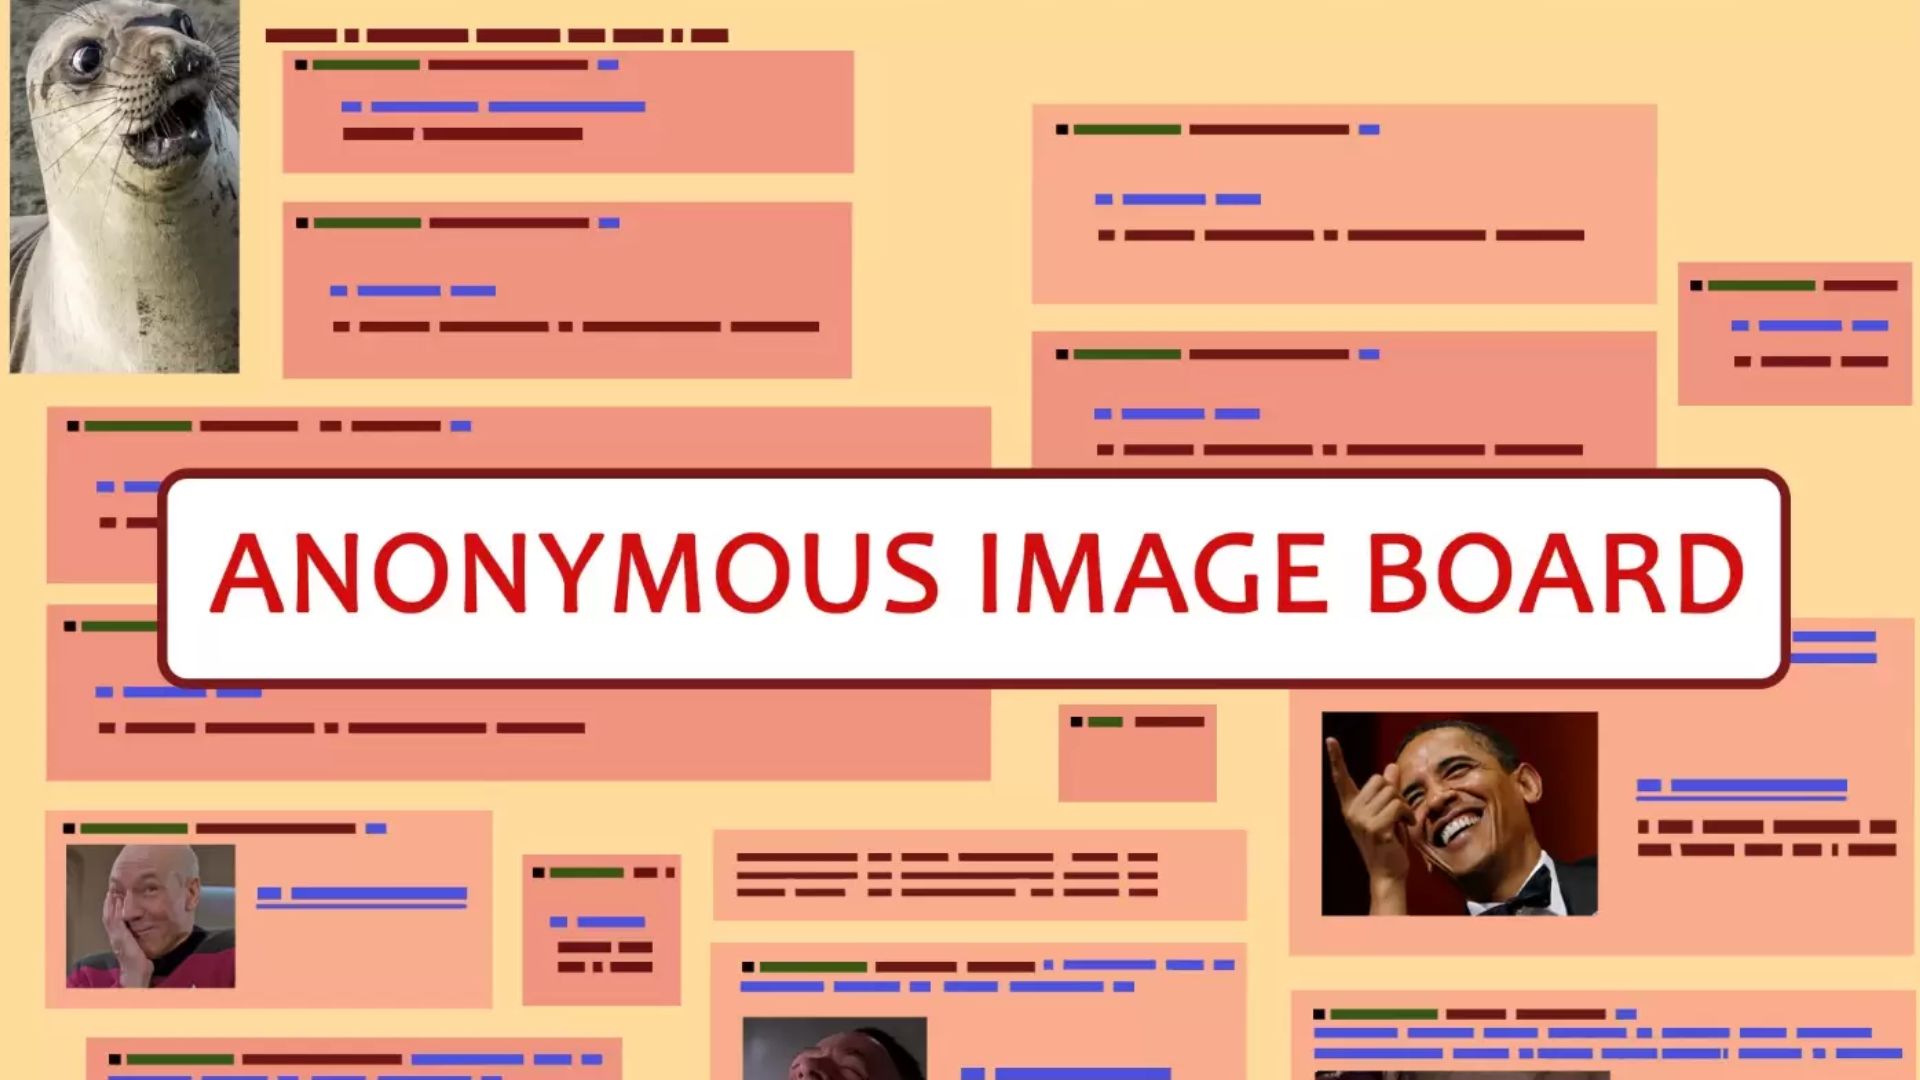 Anon Imageboard - A Deep Dive Into Online Culture